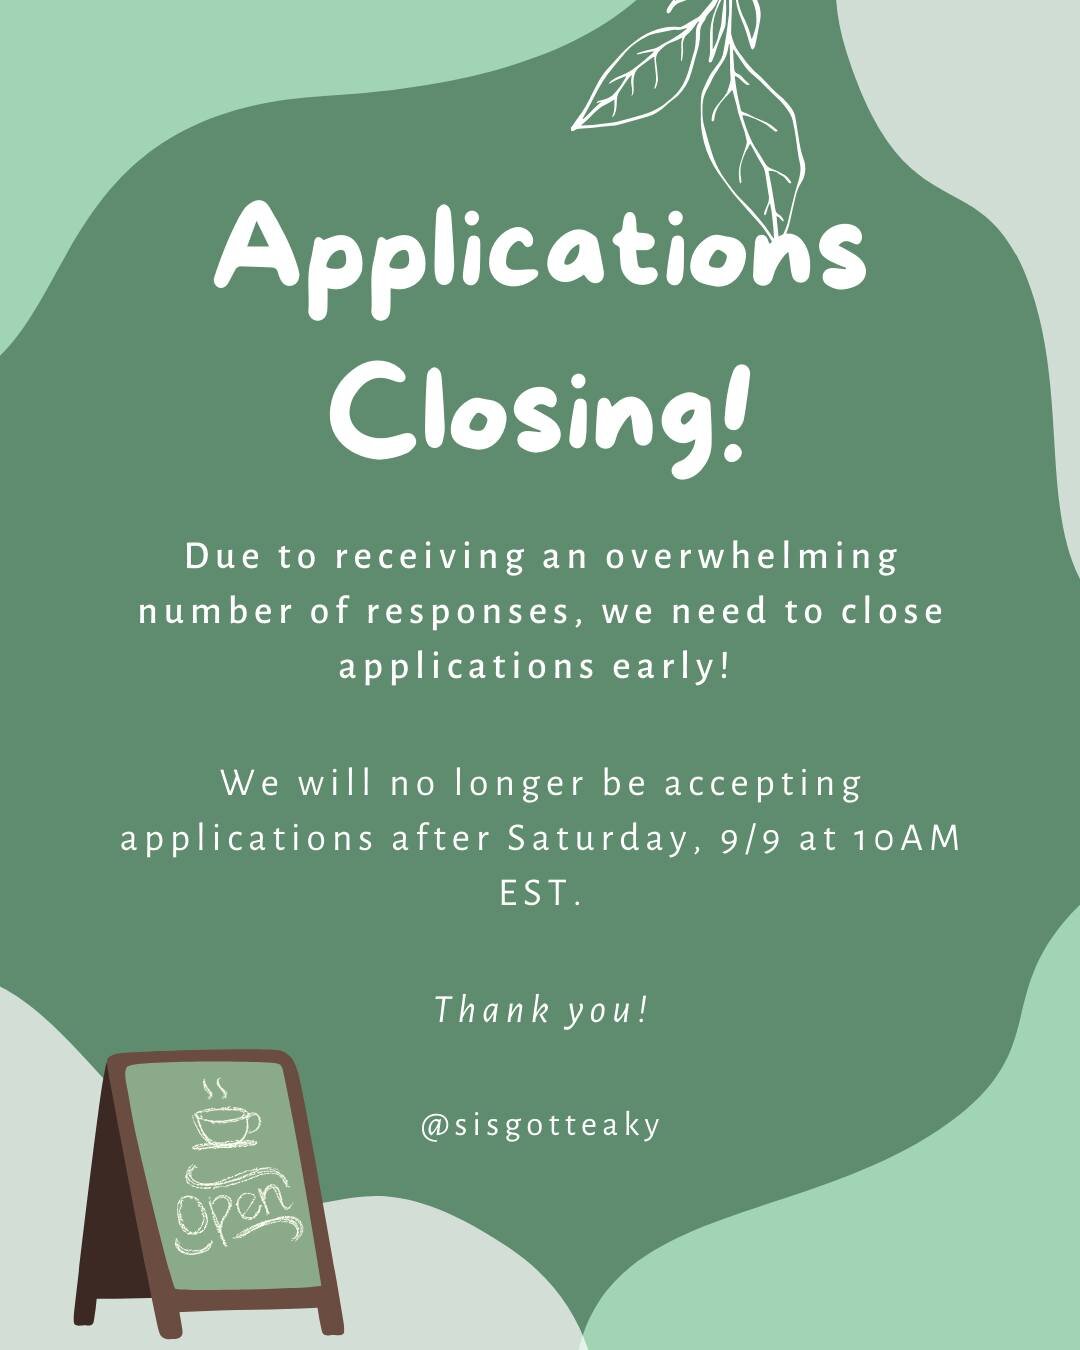 📃 APPLICATIONS CLOSING 📃

We've been absolutely overwhelmed by the incredible response to our job posting! Your enthusiasm and passion for what we do here at the cafe is truly inspiring. We're so grateful to have had so many wonderful members of th